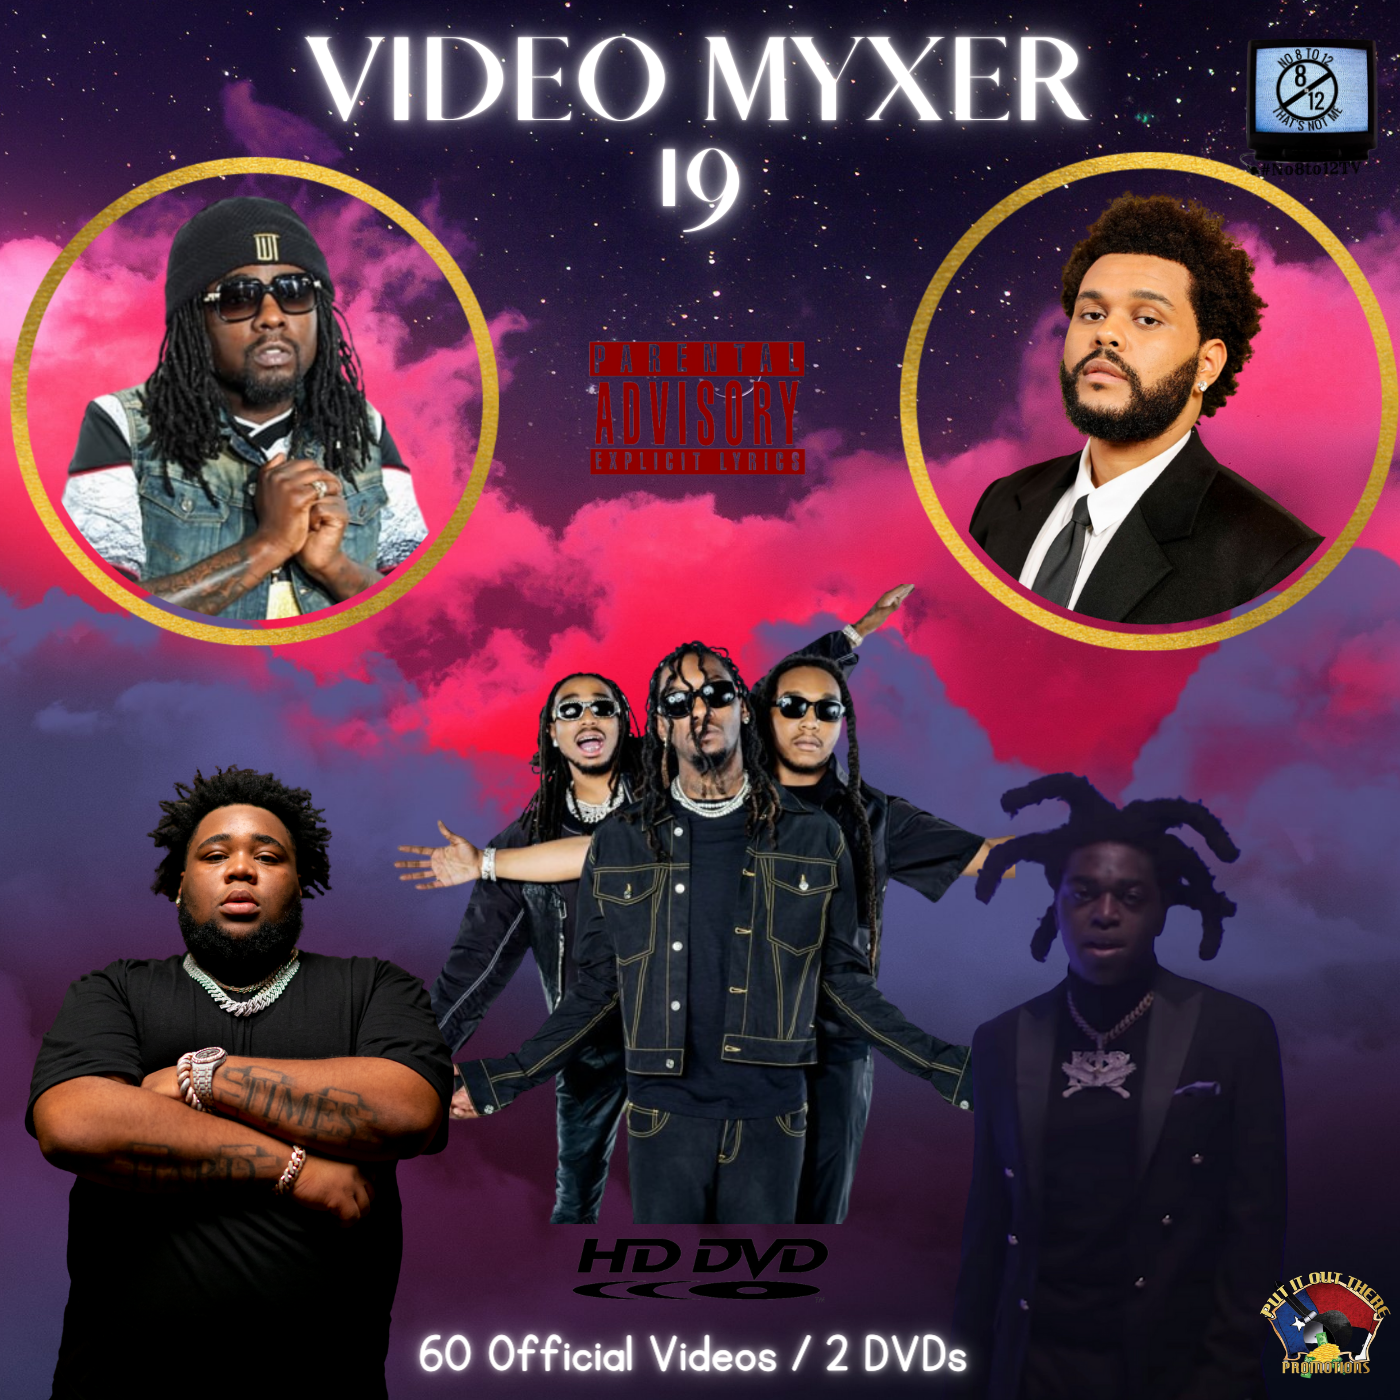 #No8to12TV Video Myxer 19 (Double DVD set)... 60 official music videos